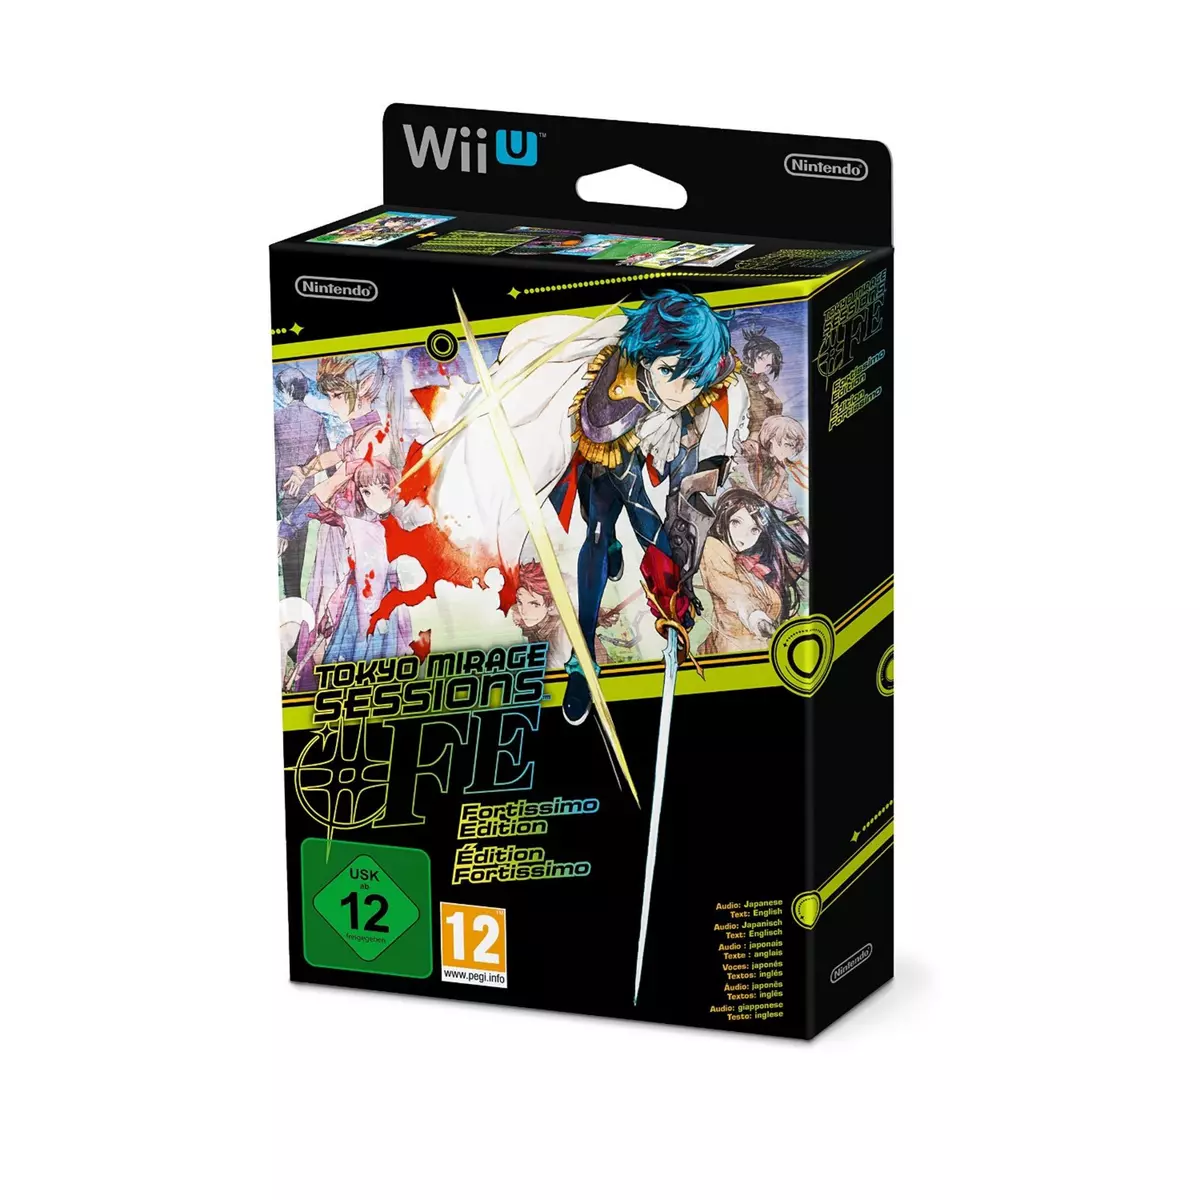 Tokyo Mirage Sessions #FE - Fortissimo Edition - Edition Limited Wii U